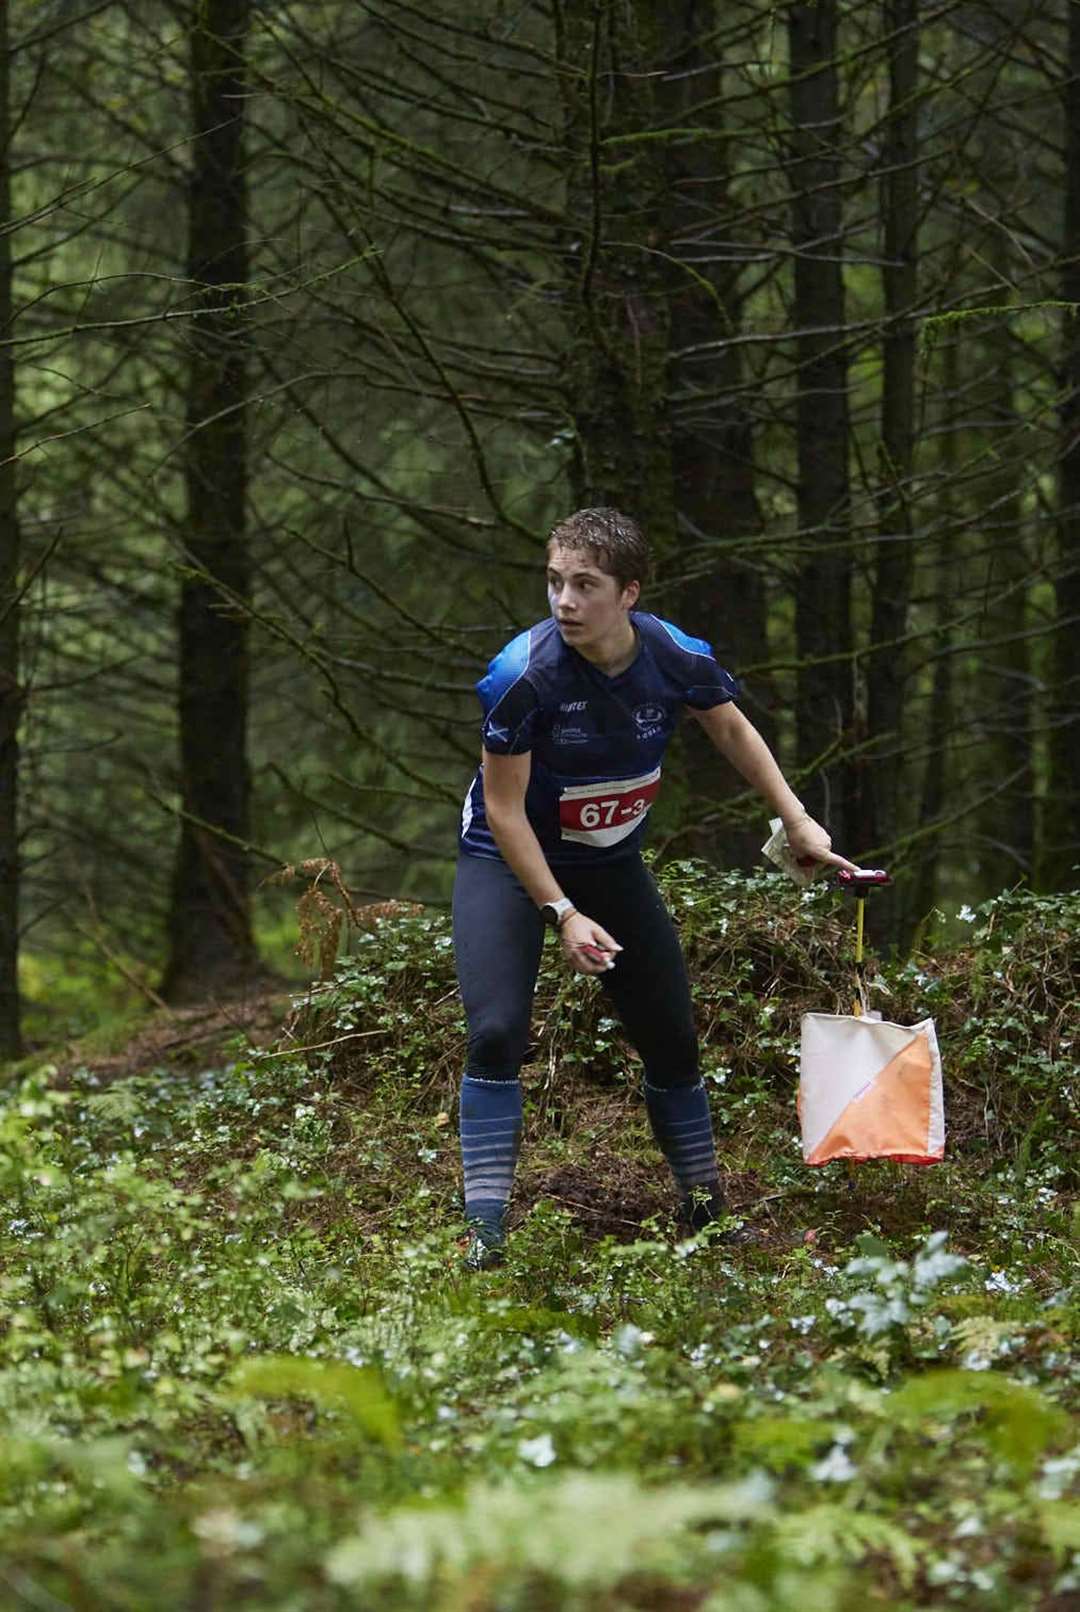 Isobel Howard is at home in the forest, using her mental and physical ability to excel in her sport.